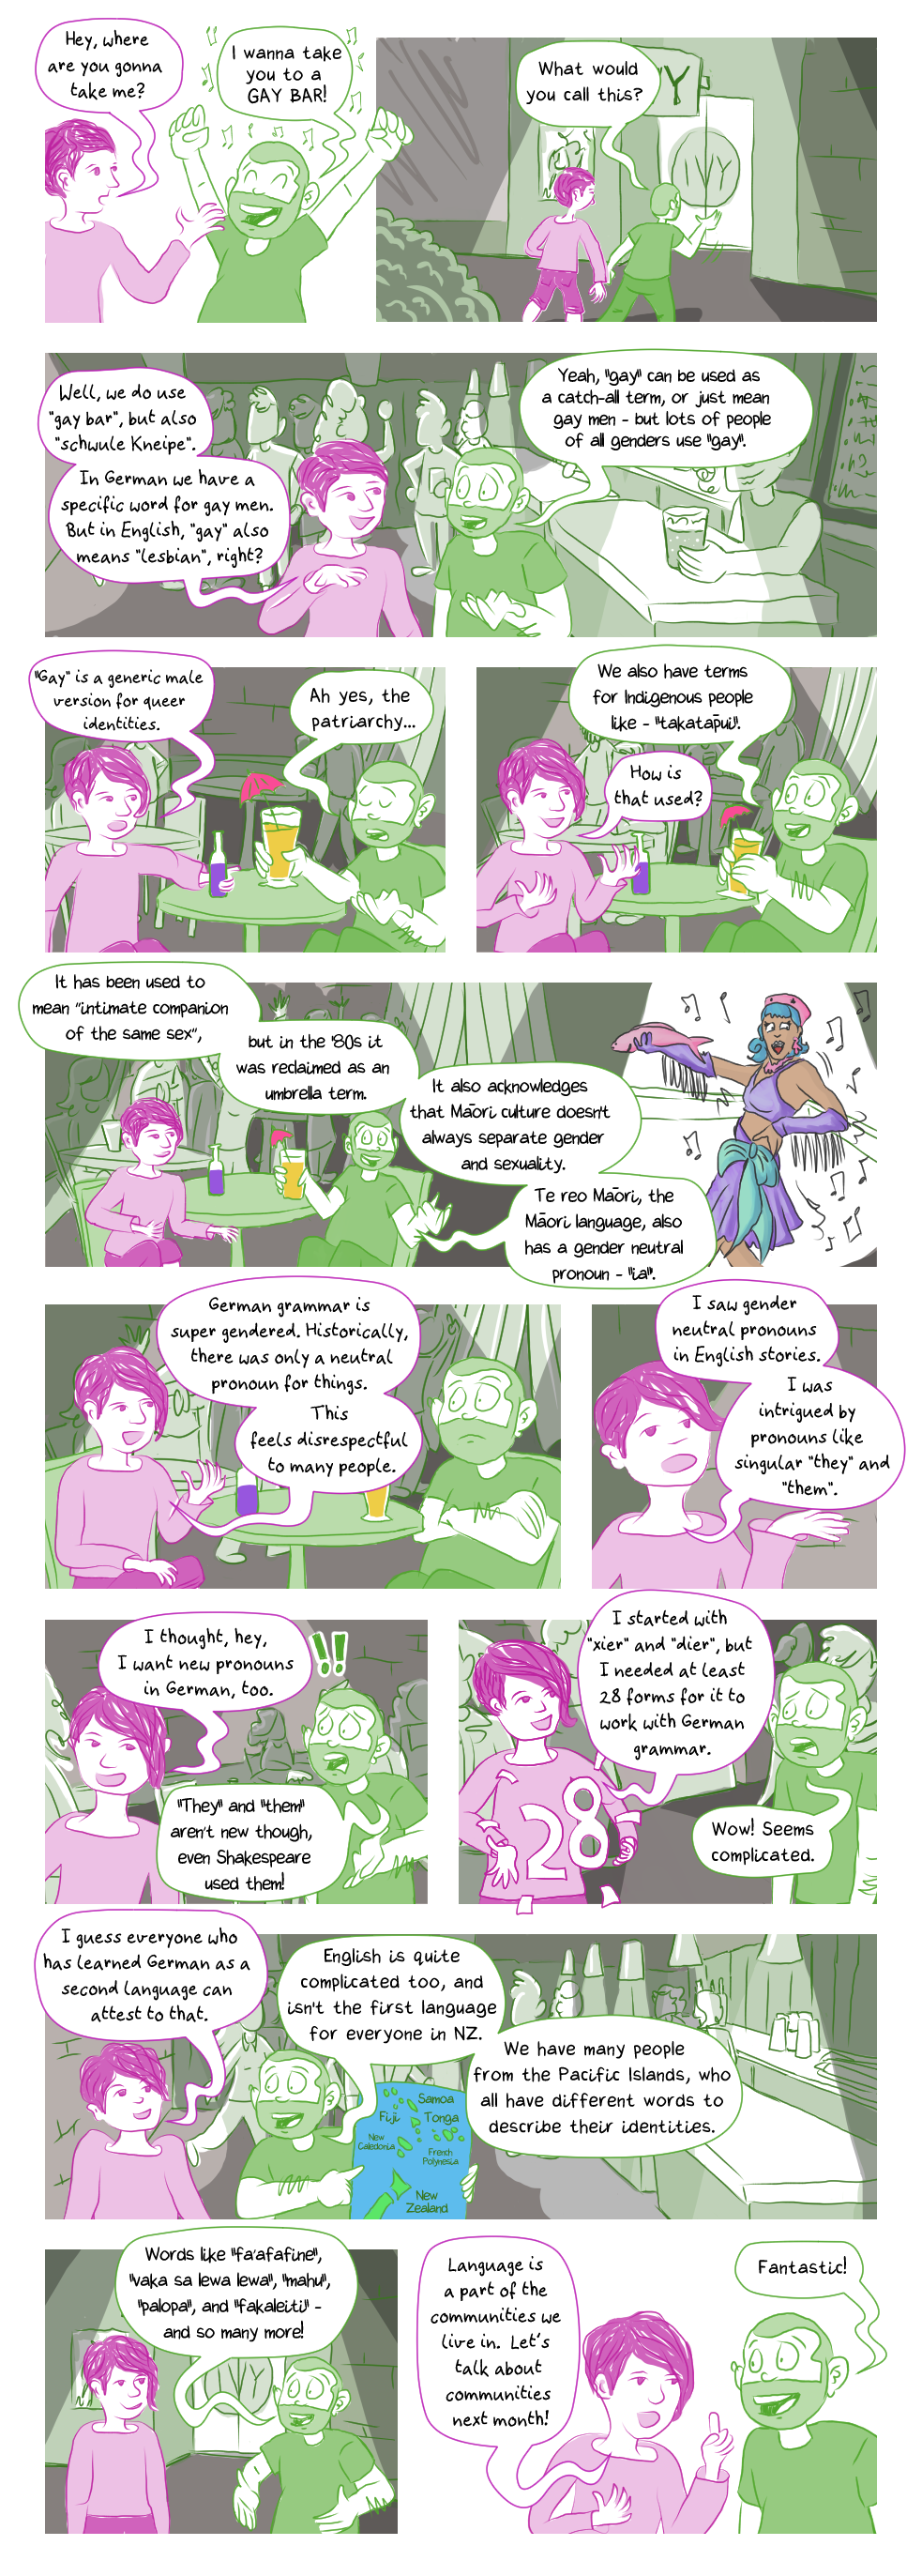 visual comic: Queer Comic Conversation - August: Labels, scroll down for text-based comic (after annotations)